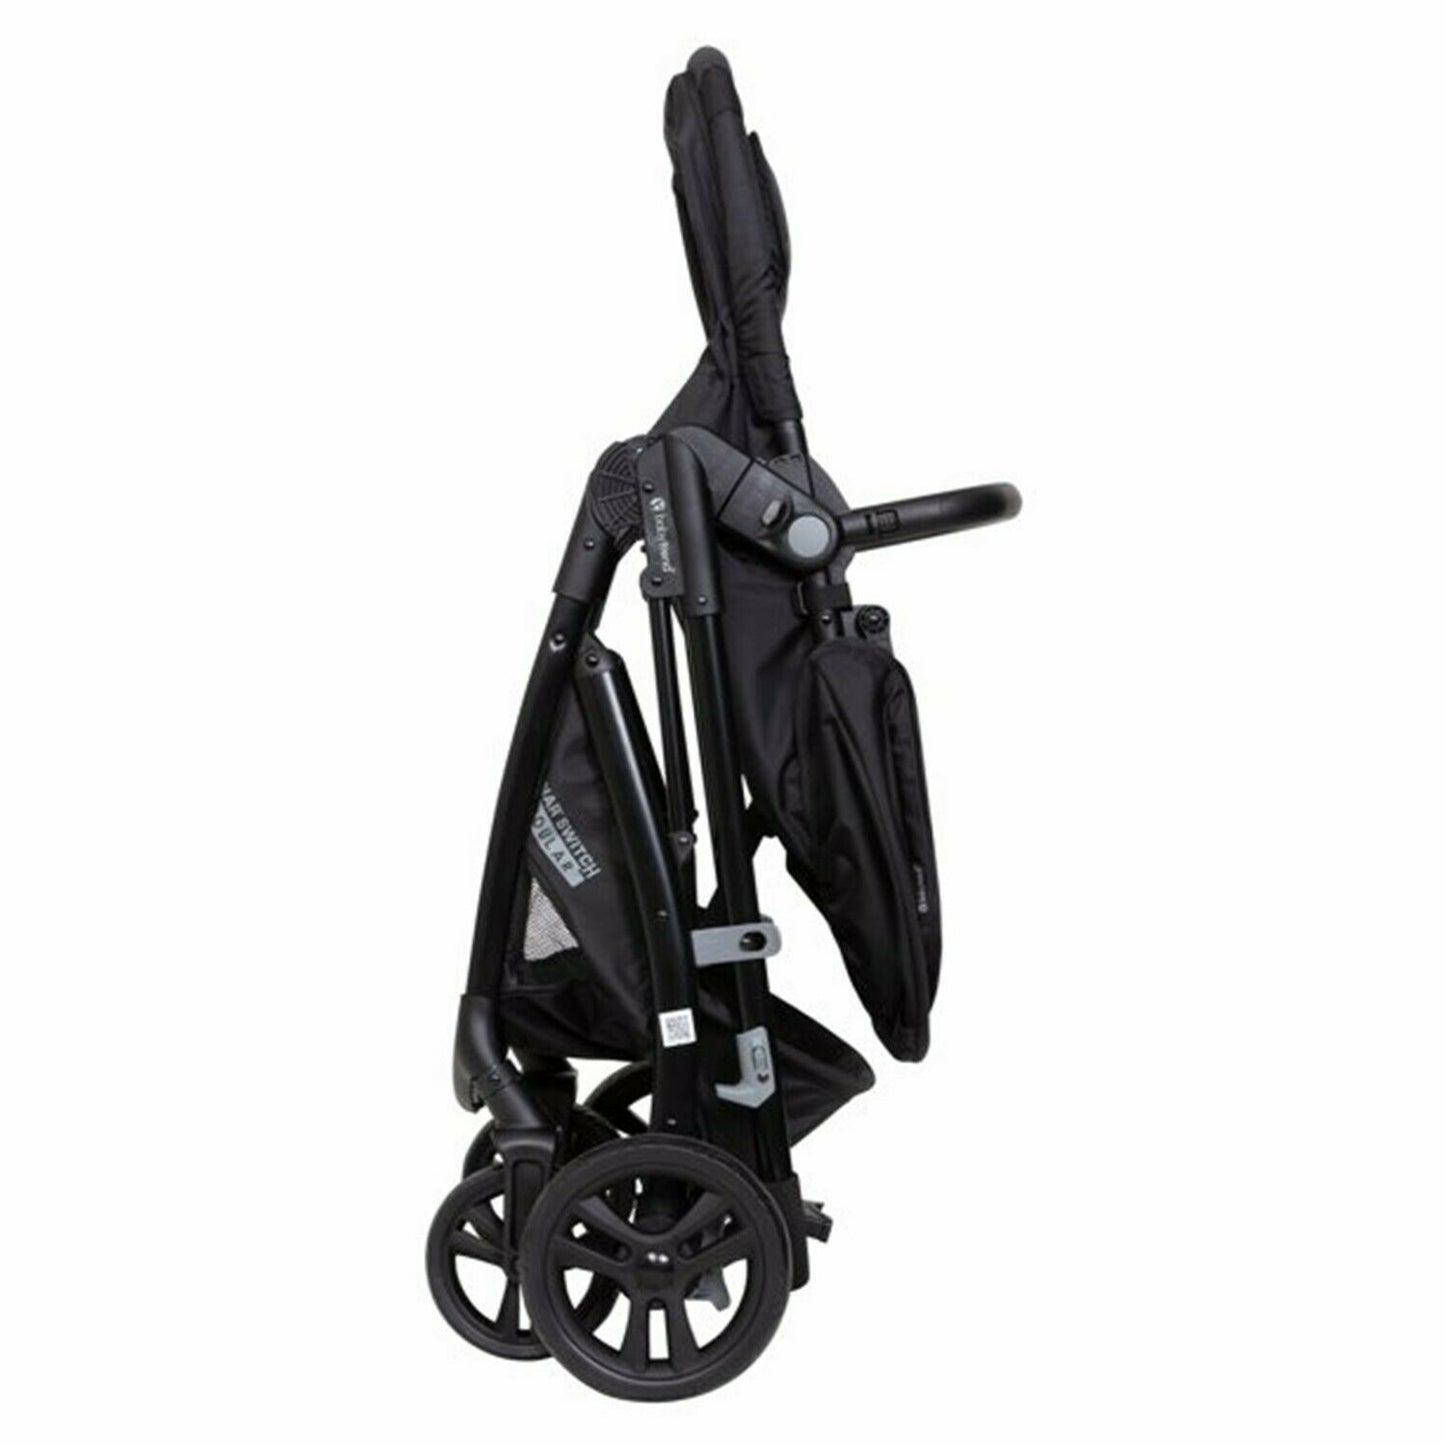 Baby Trend Stroller 6-in-1 Travel System with Car Seat Infant Playard Nursery